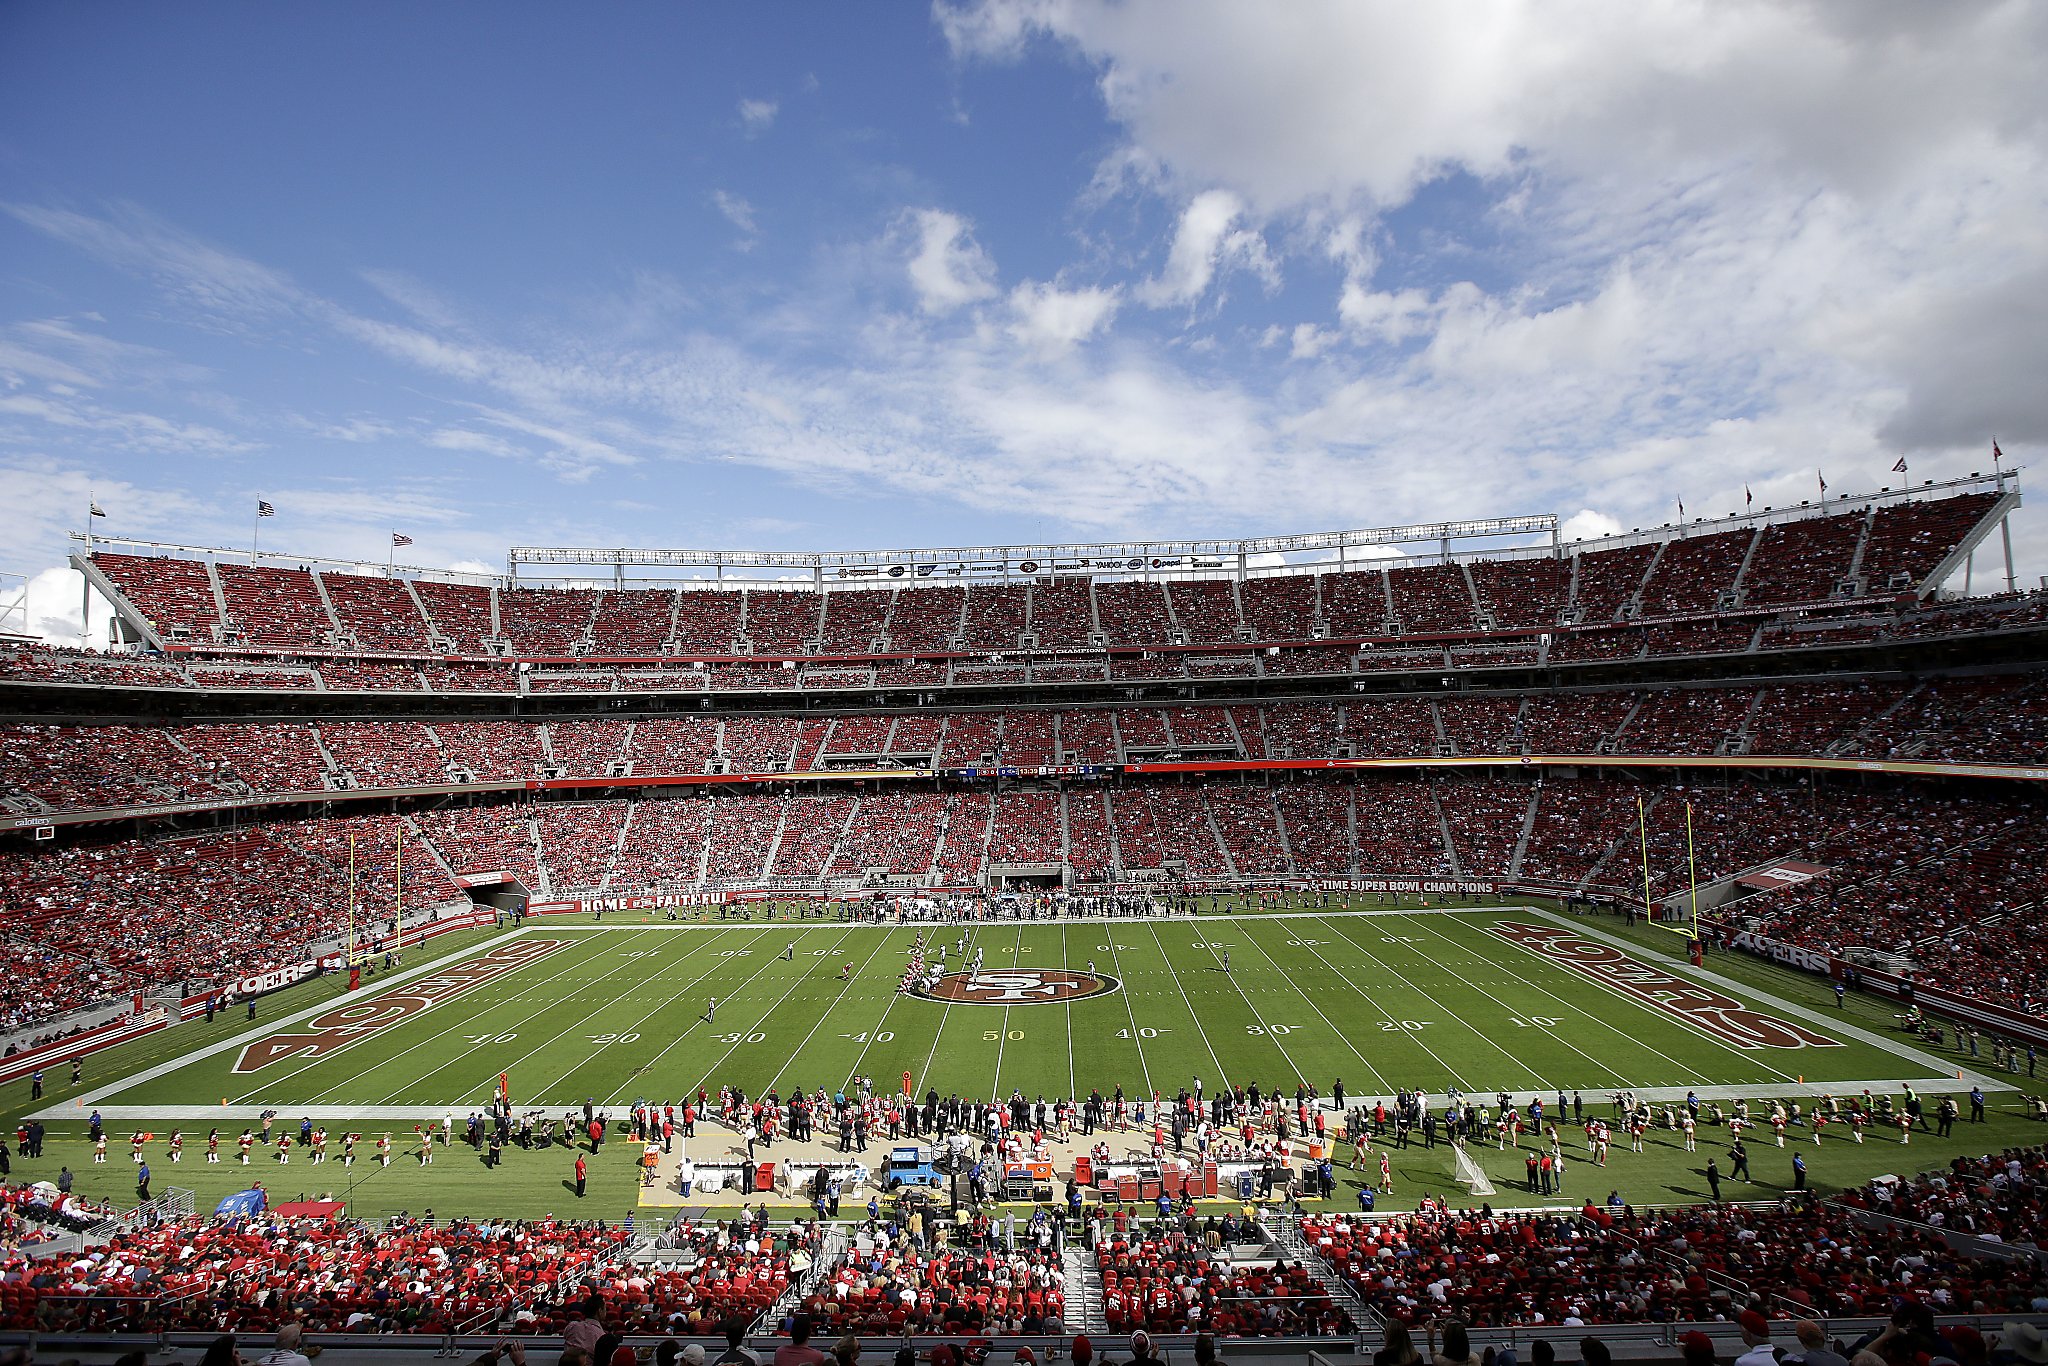 Soccer match at Levi's Stadium expected to cause traffic gridlock